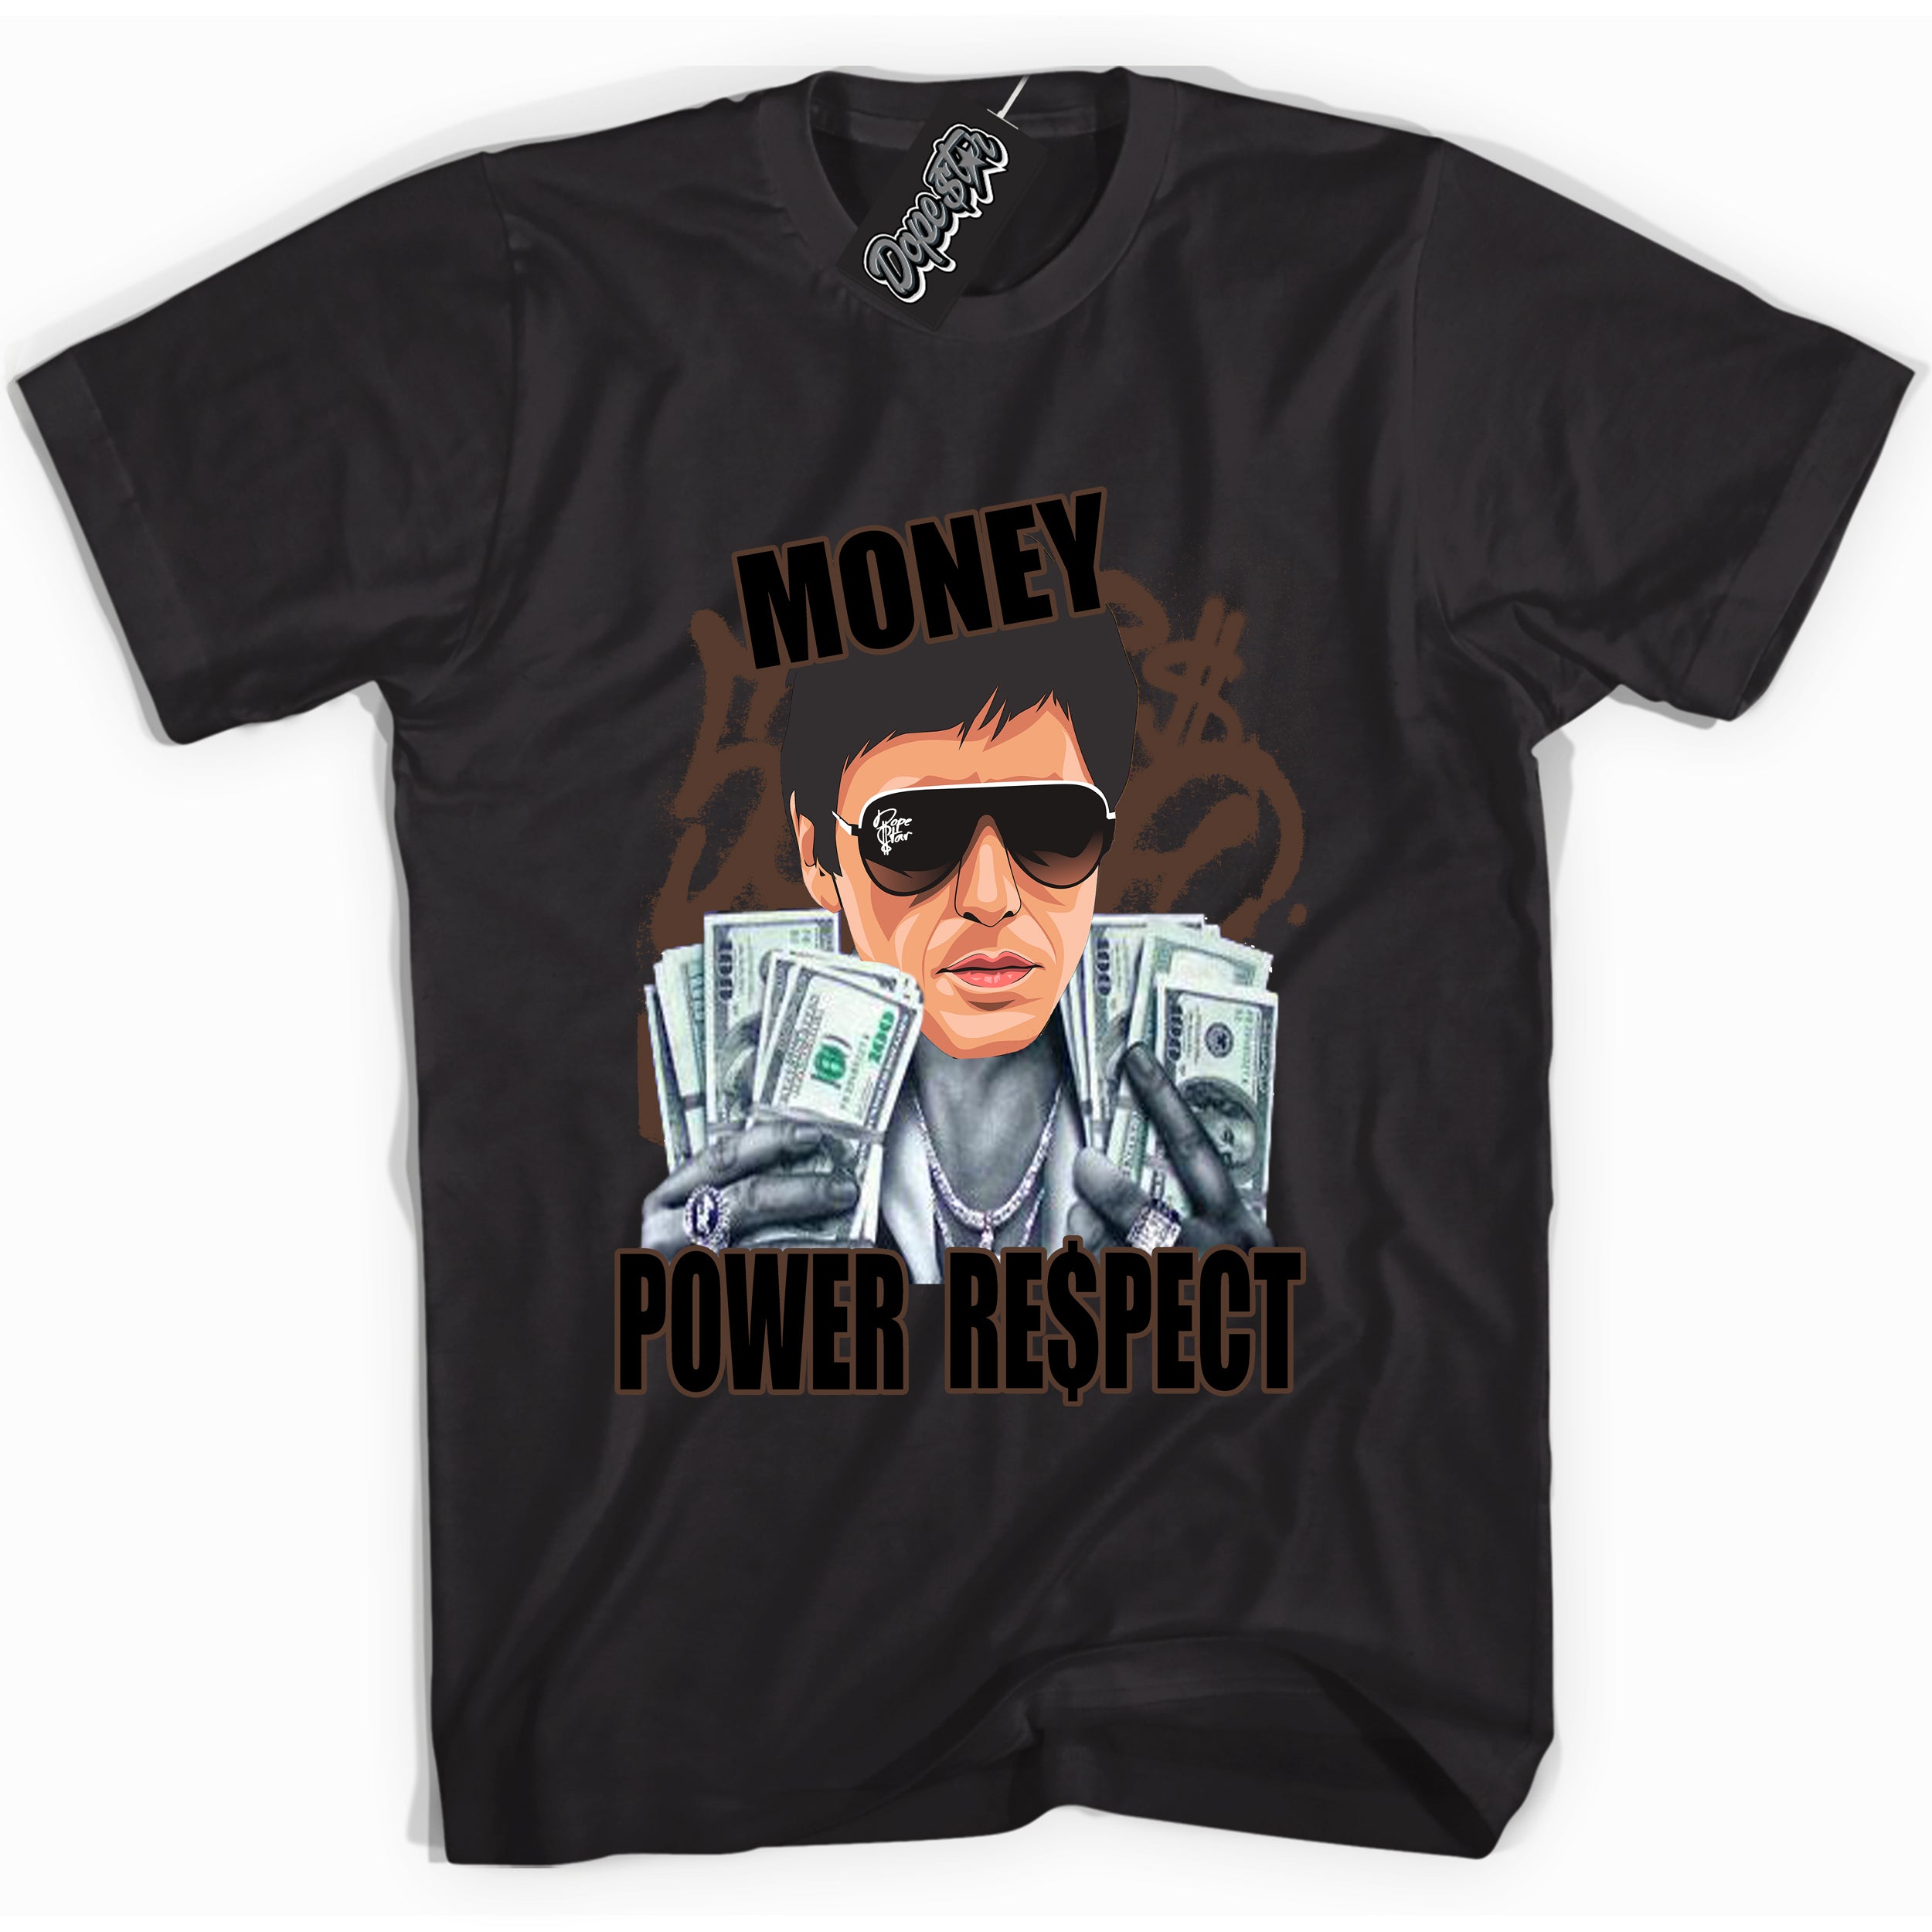 Cool Black graphic tee with “ Tony Montana ” design, that perfectly matches Palomino 1s sneakers 